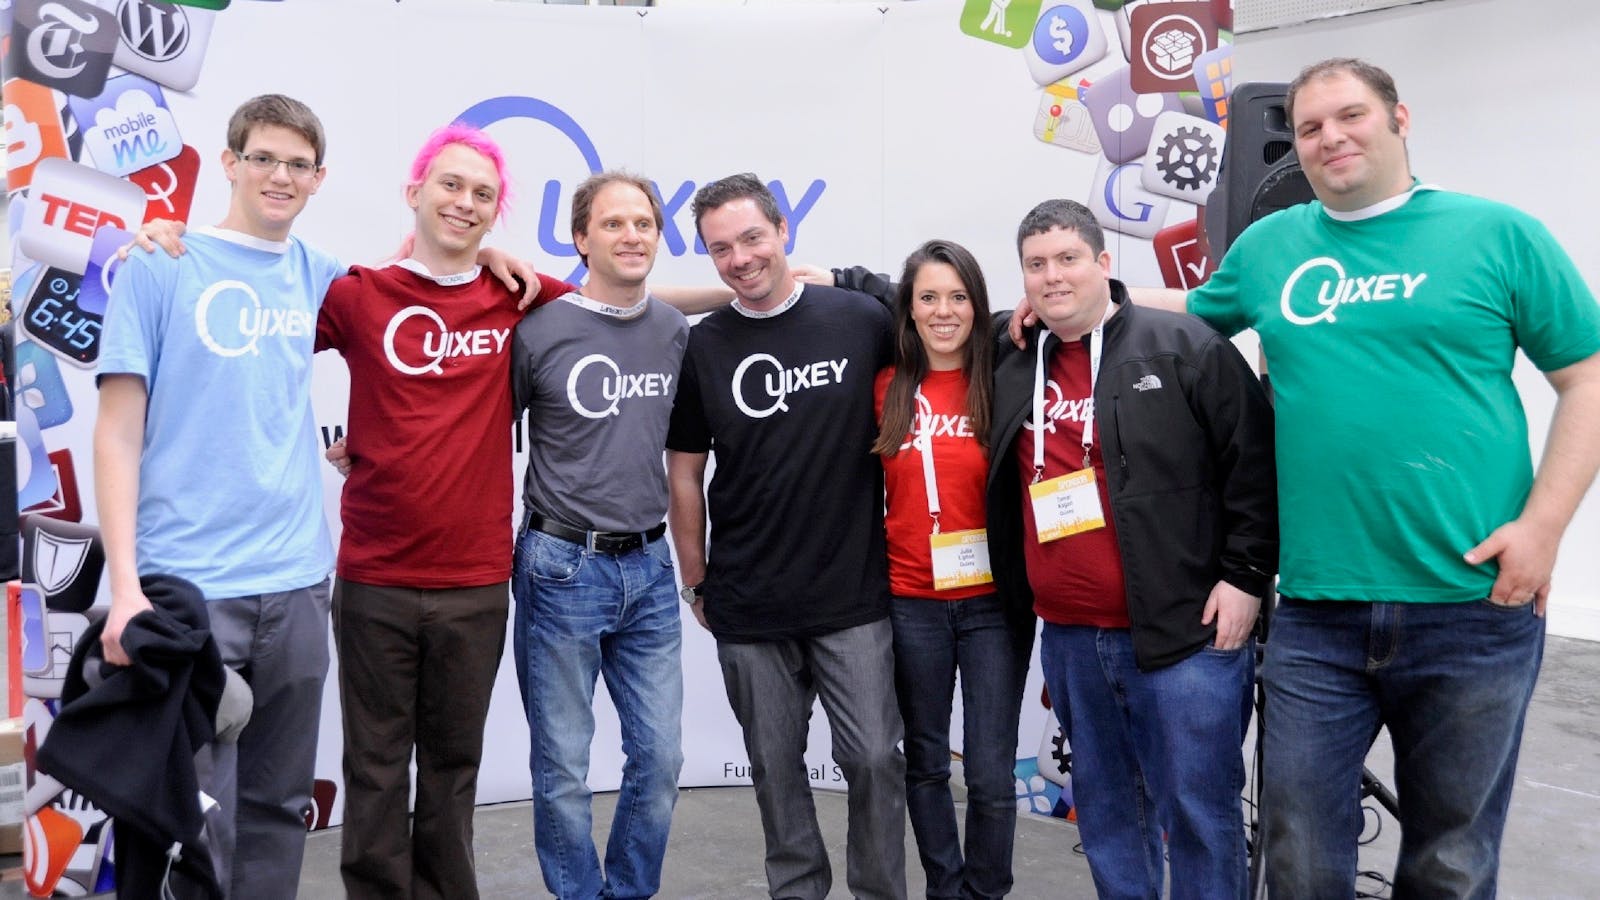 Former Quixey co-founder CEO Tomer Kagan, second from right. Photo by Flickr/TechCrunch.